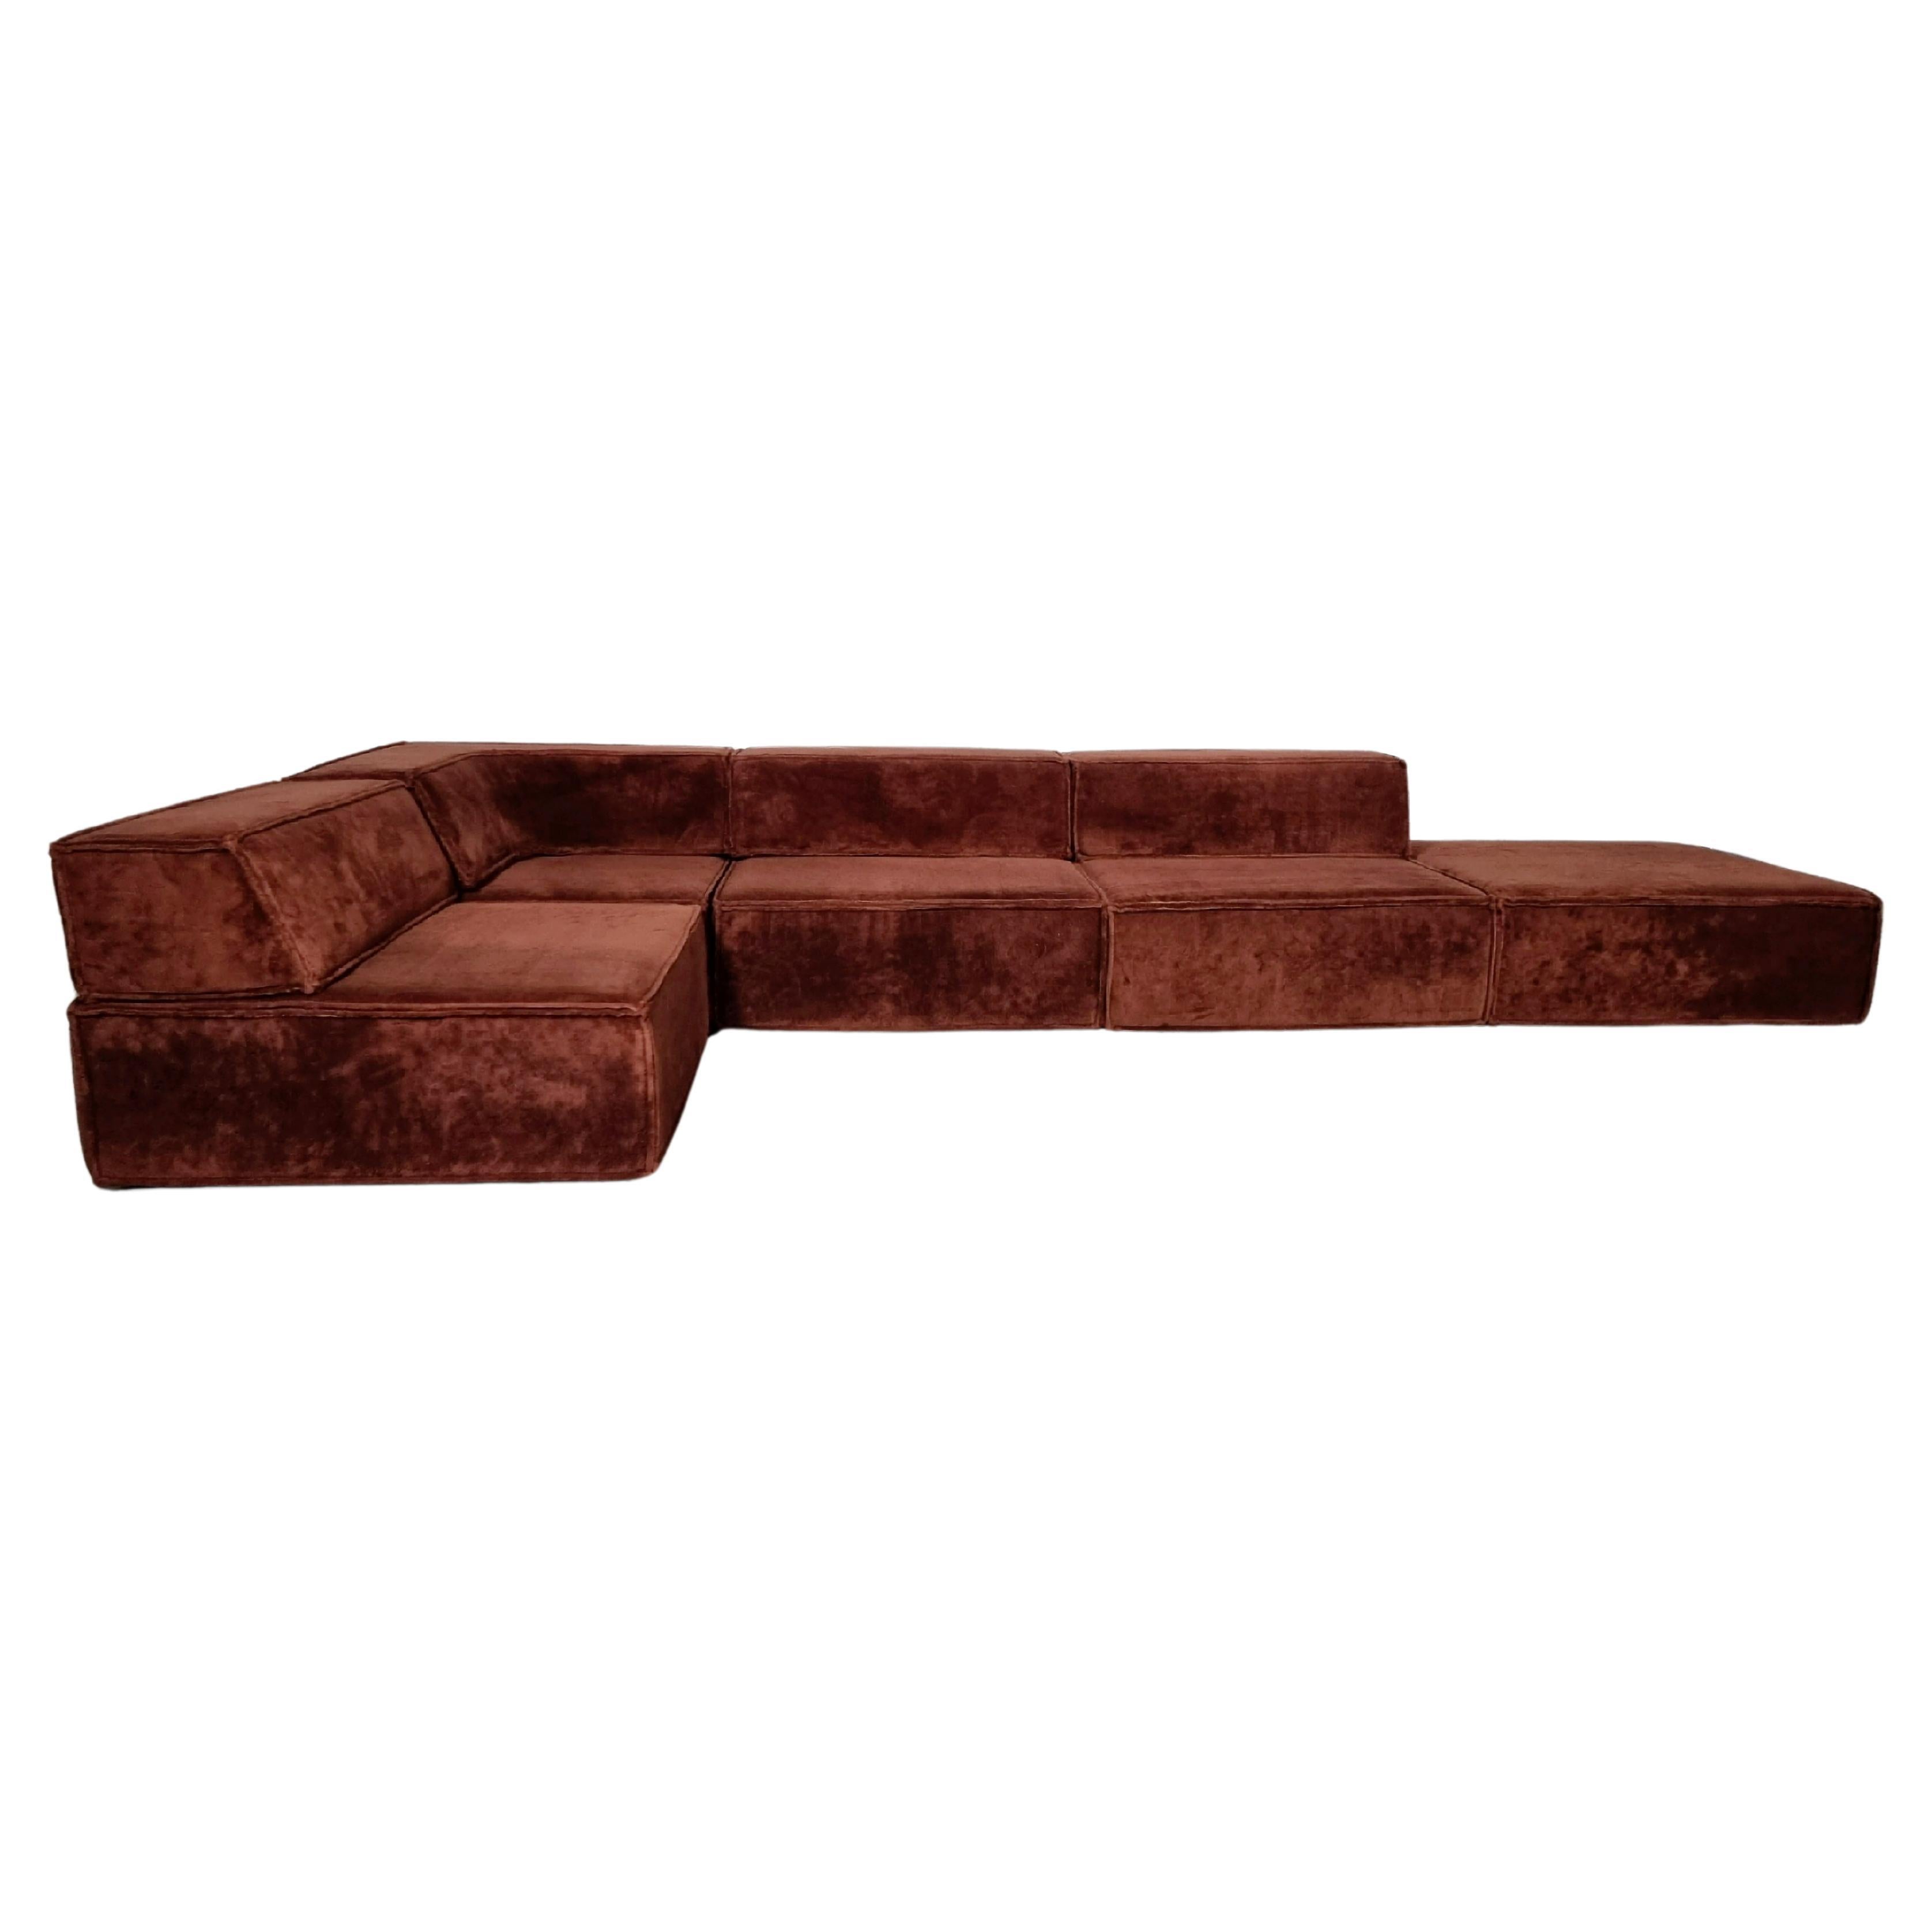 A very beautiful sofa landscape was designed by the Swiss Designers Group named Form AG and produced in the 1970s by COR, Germany. Many different kinds of variants are possible because of the modular and adjustable system of the sofa. In its